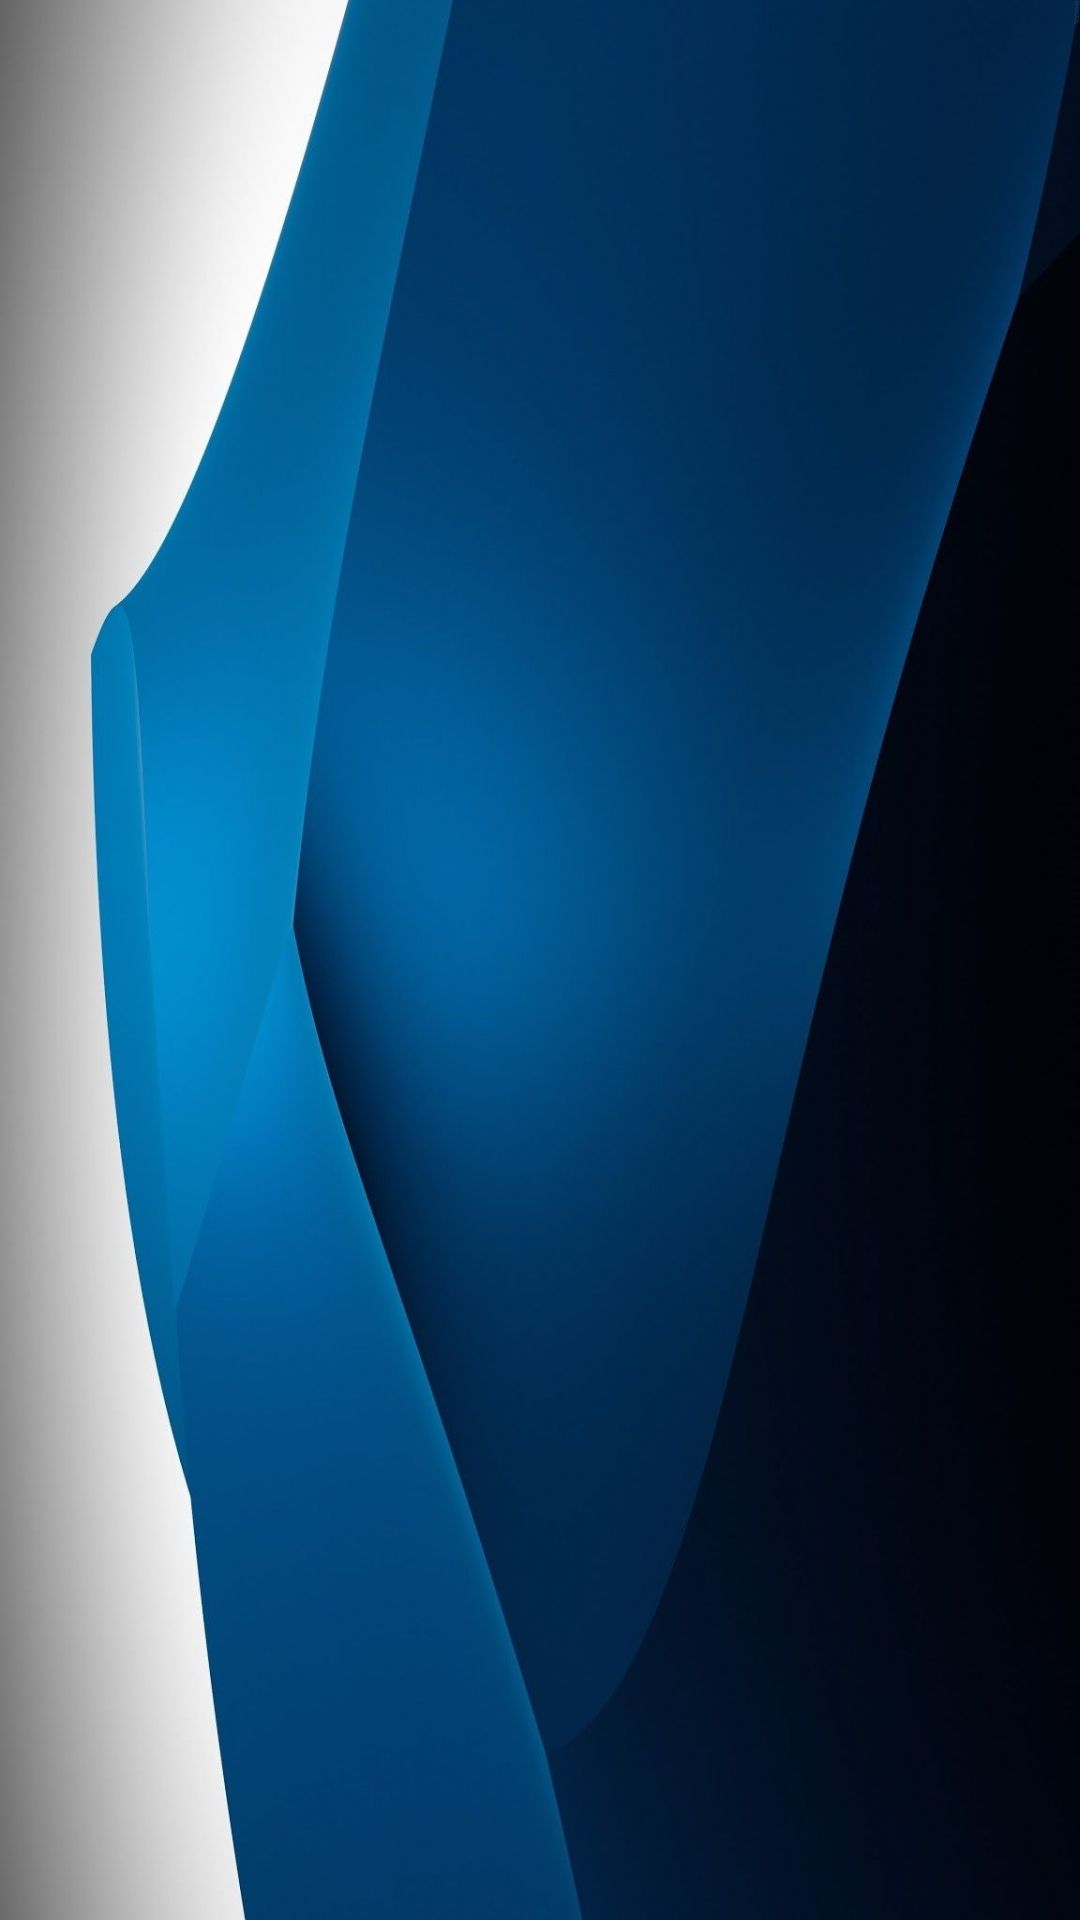 Abstract Blue And White Wallpaper Mobile > Flip Wallpaper